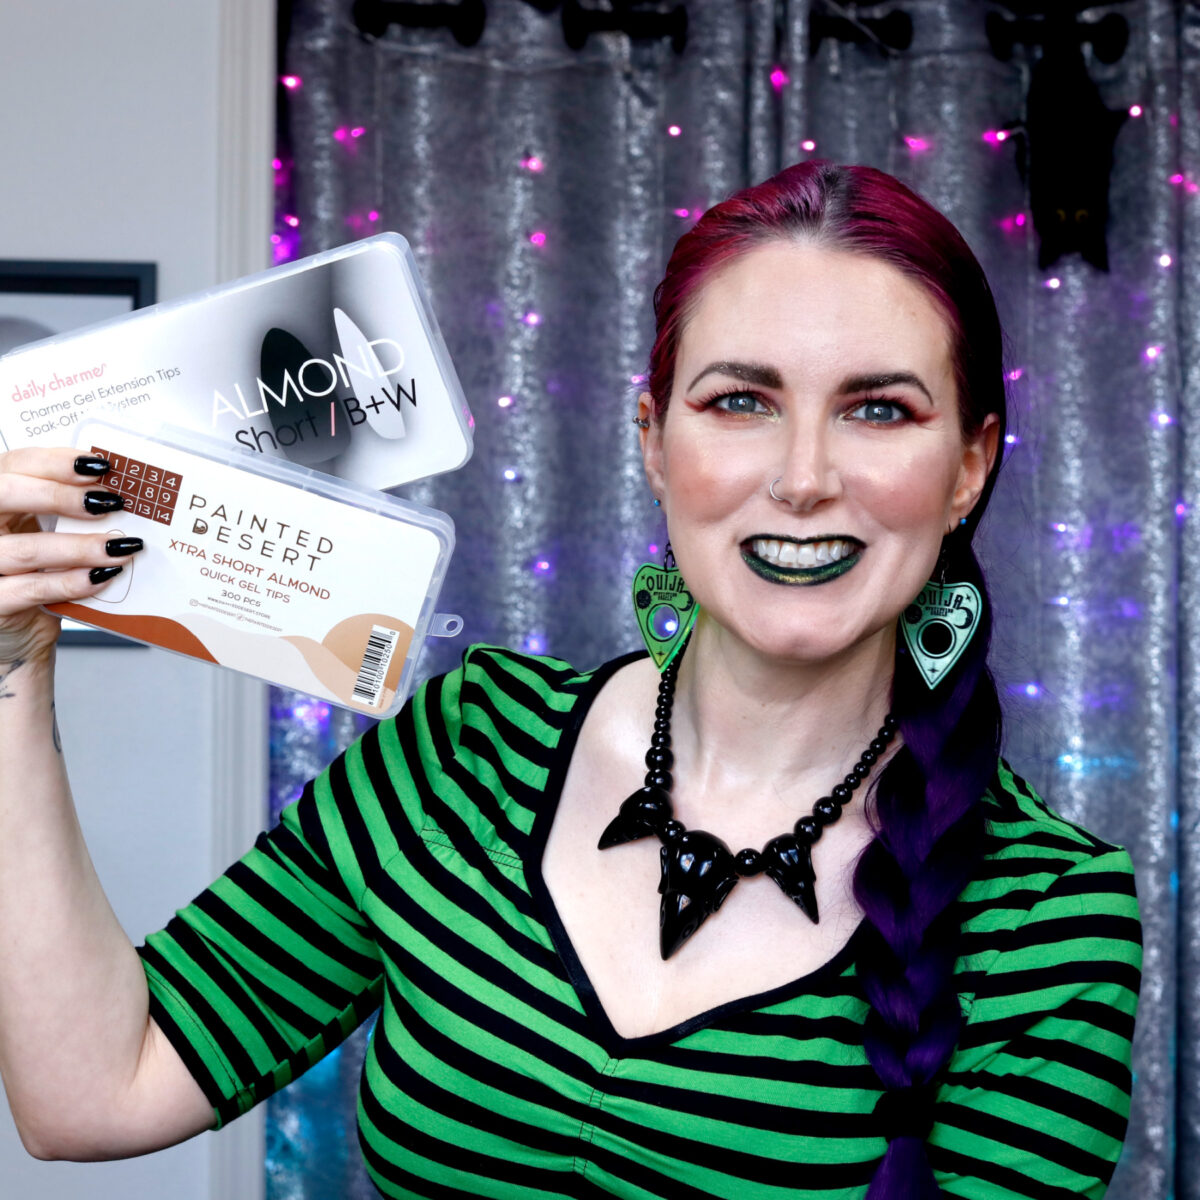 Cordelia is holding two boxes of nail art tips wearing a green and black striped shirt